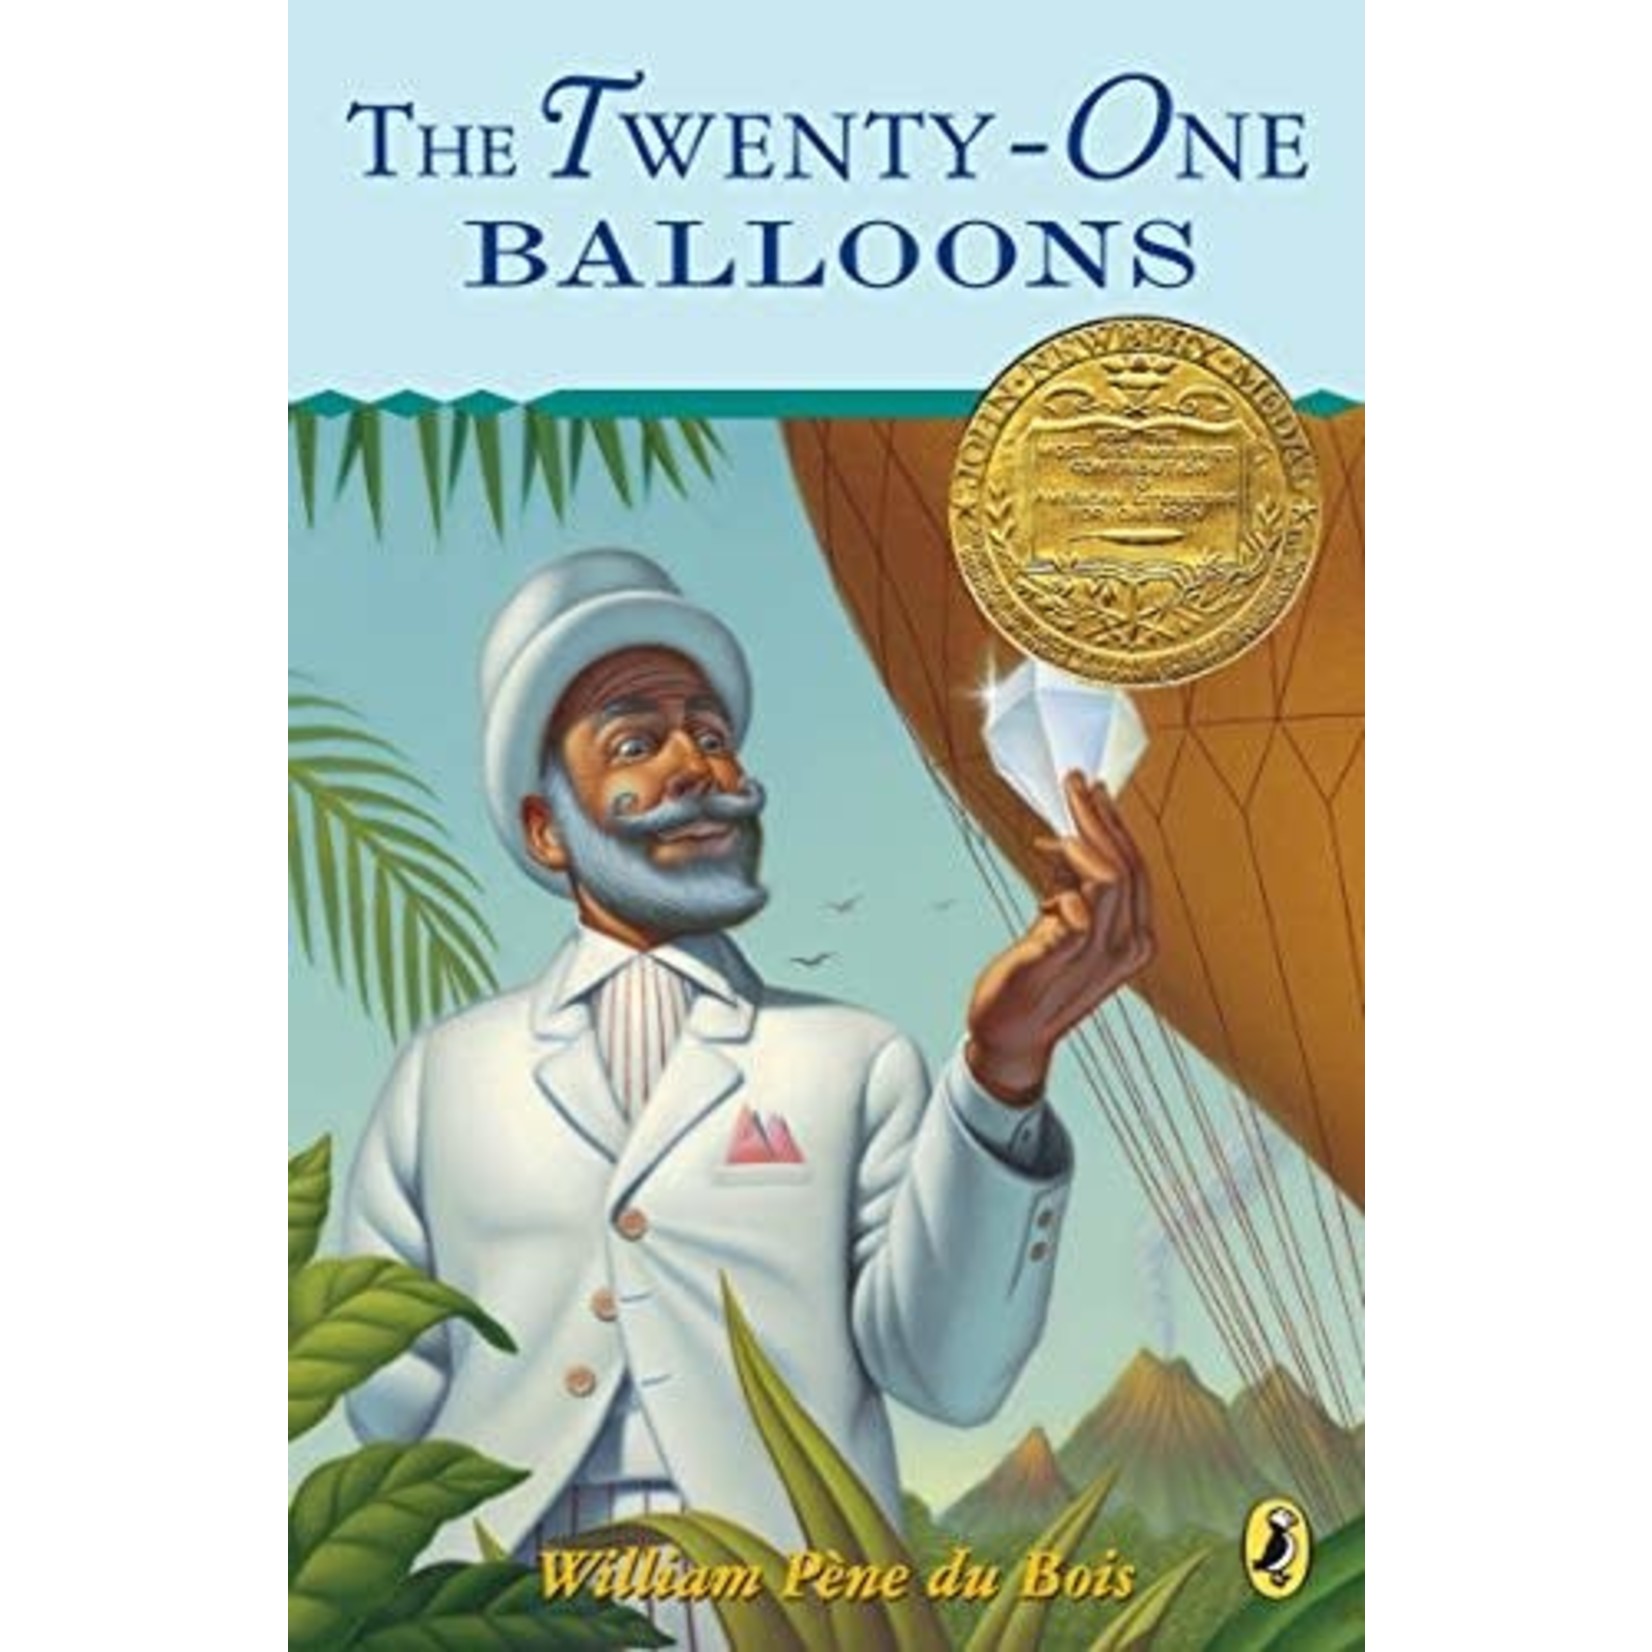 Pene du Bois, William Pene du Bois, William - The Twenty-One Balloons